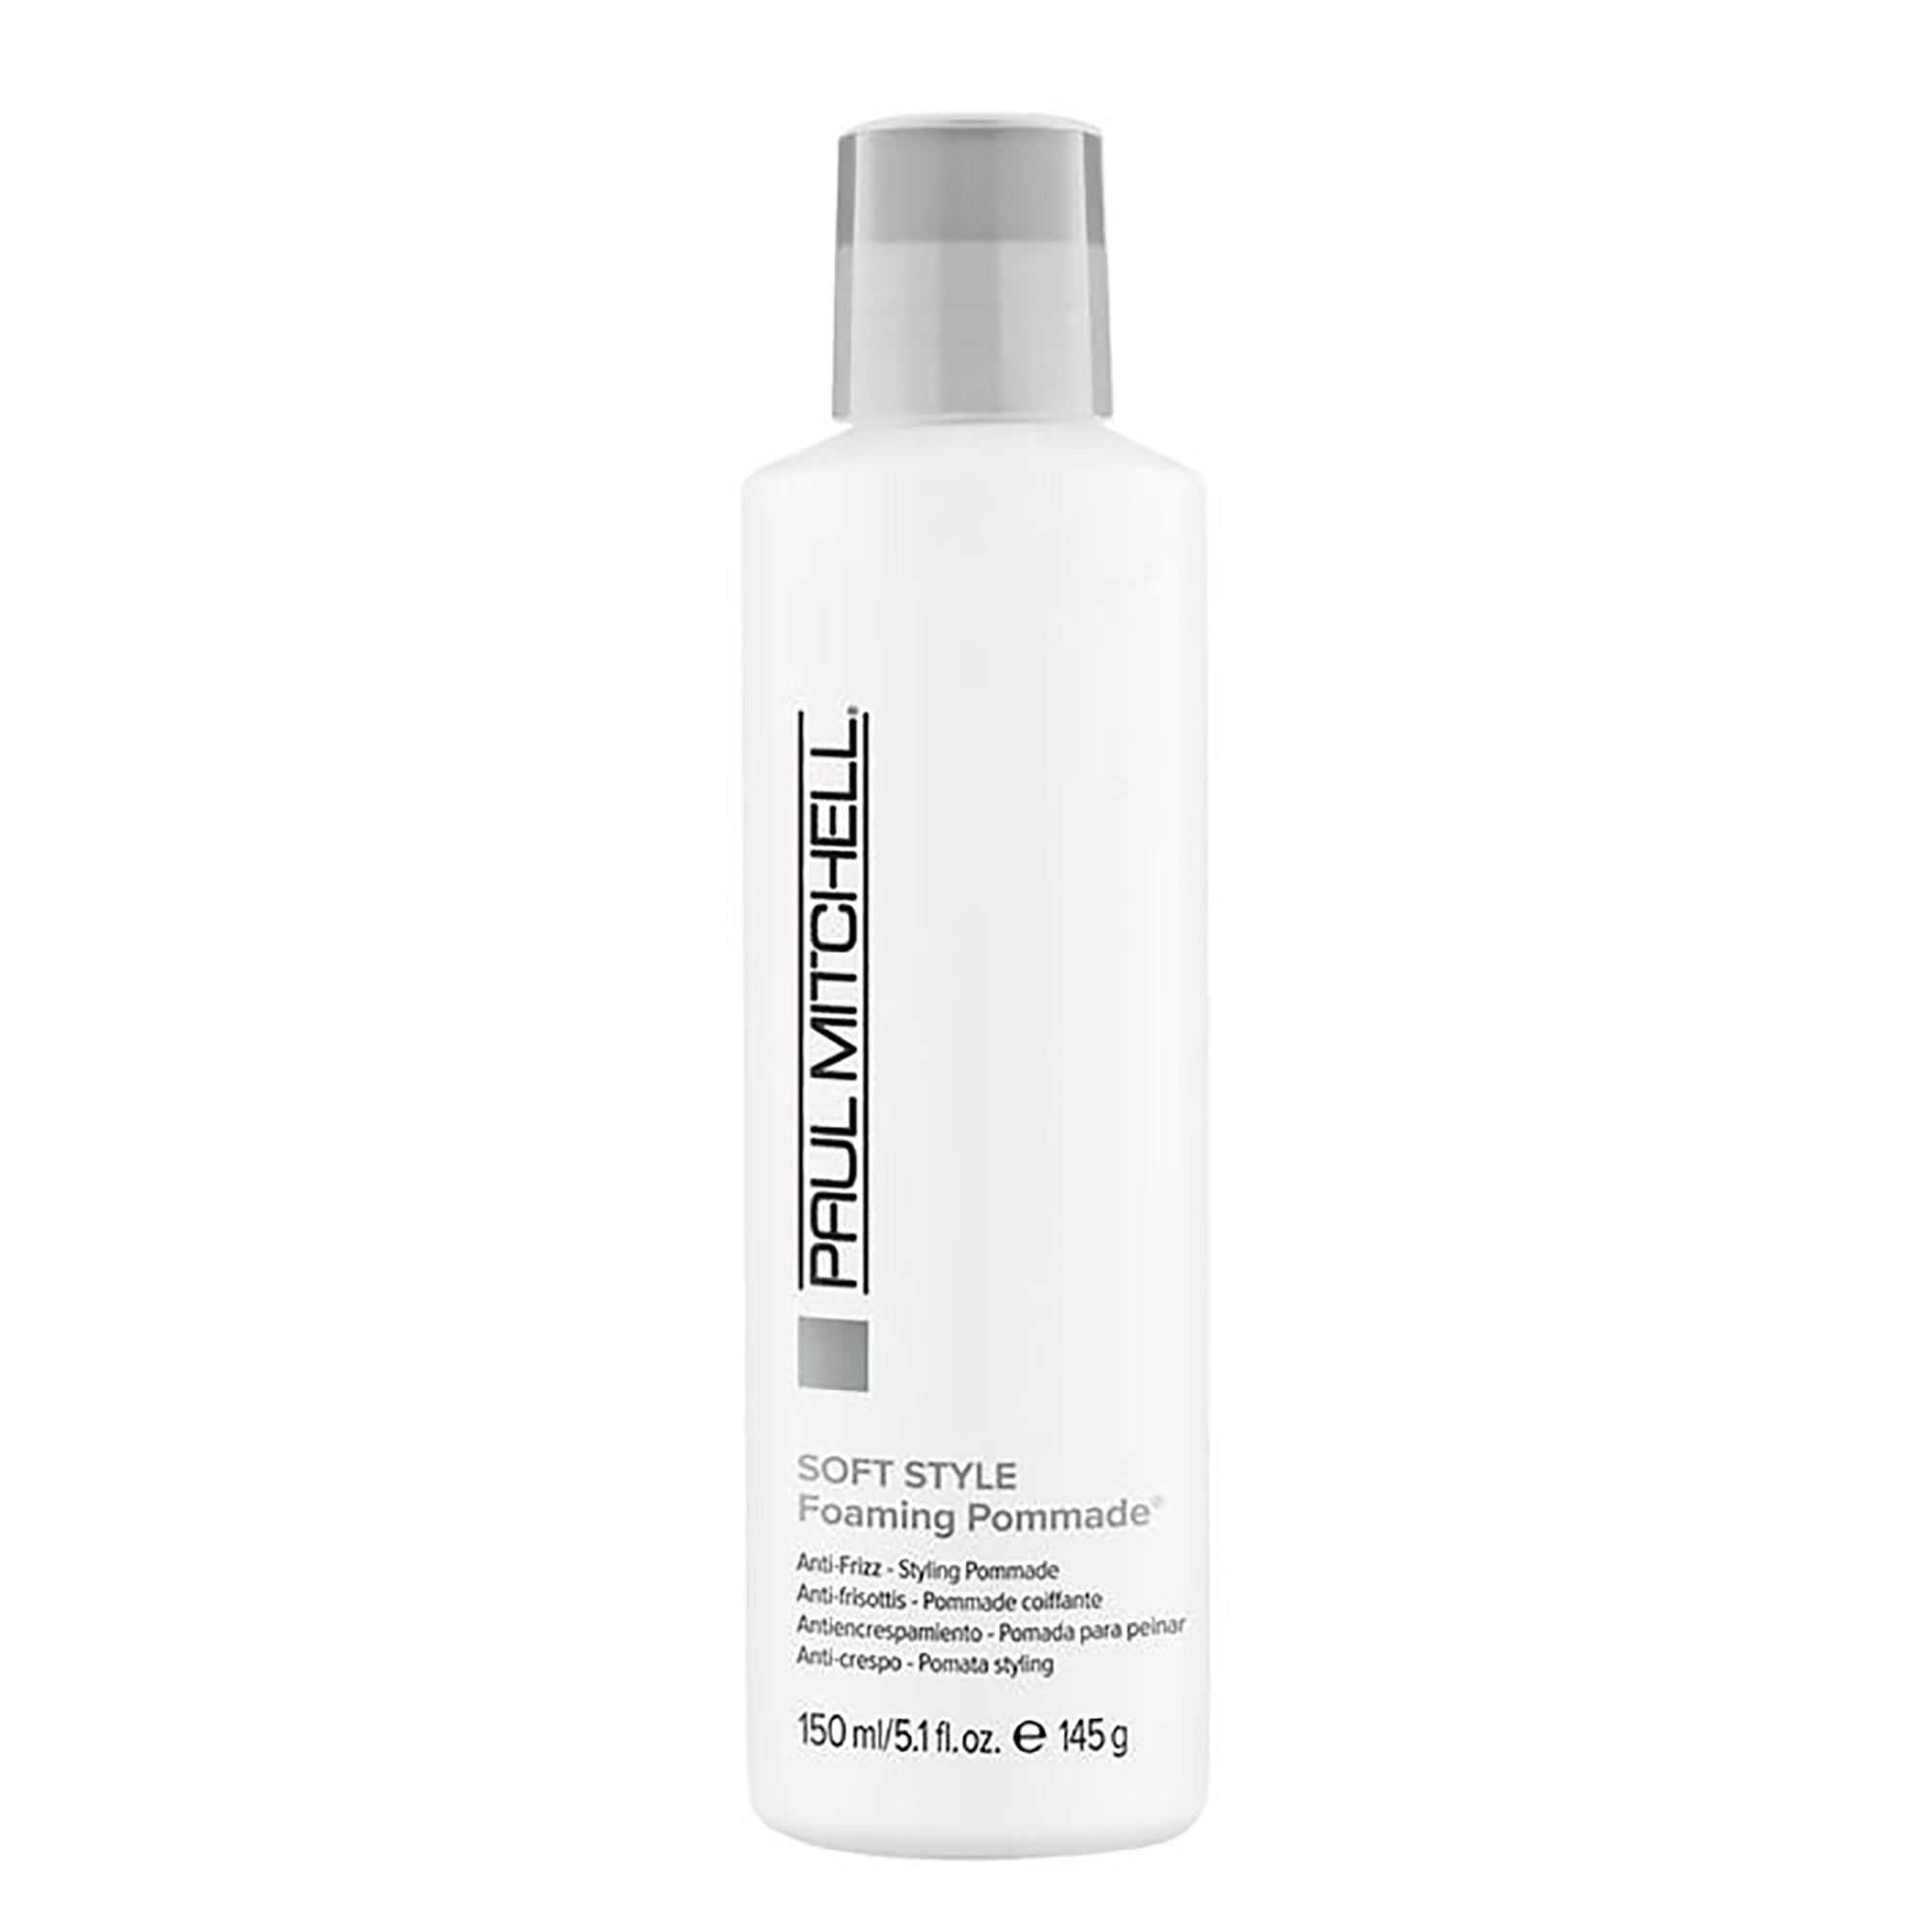 Paul Mitchell Foaming Pomade / 5.1